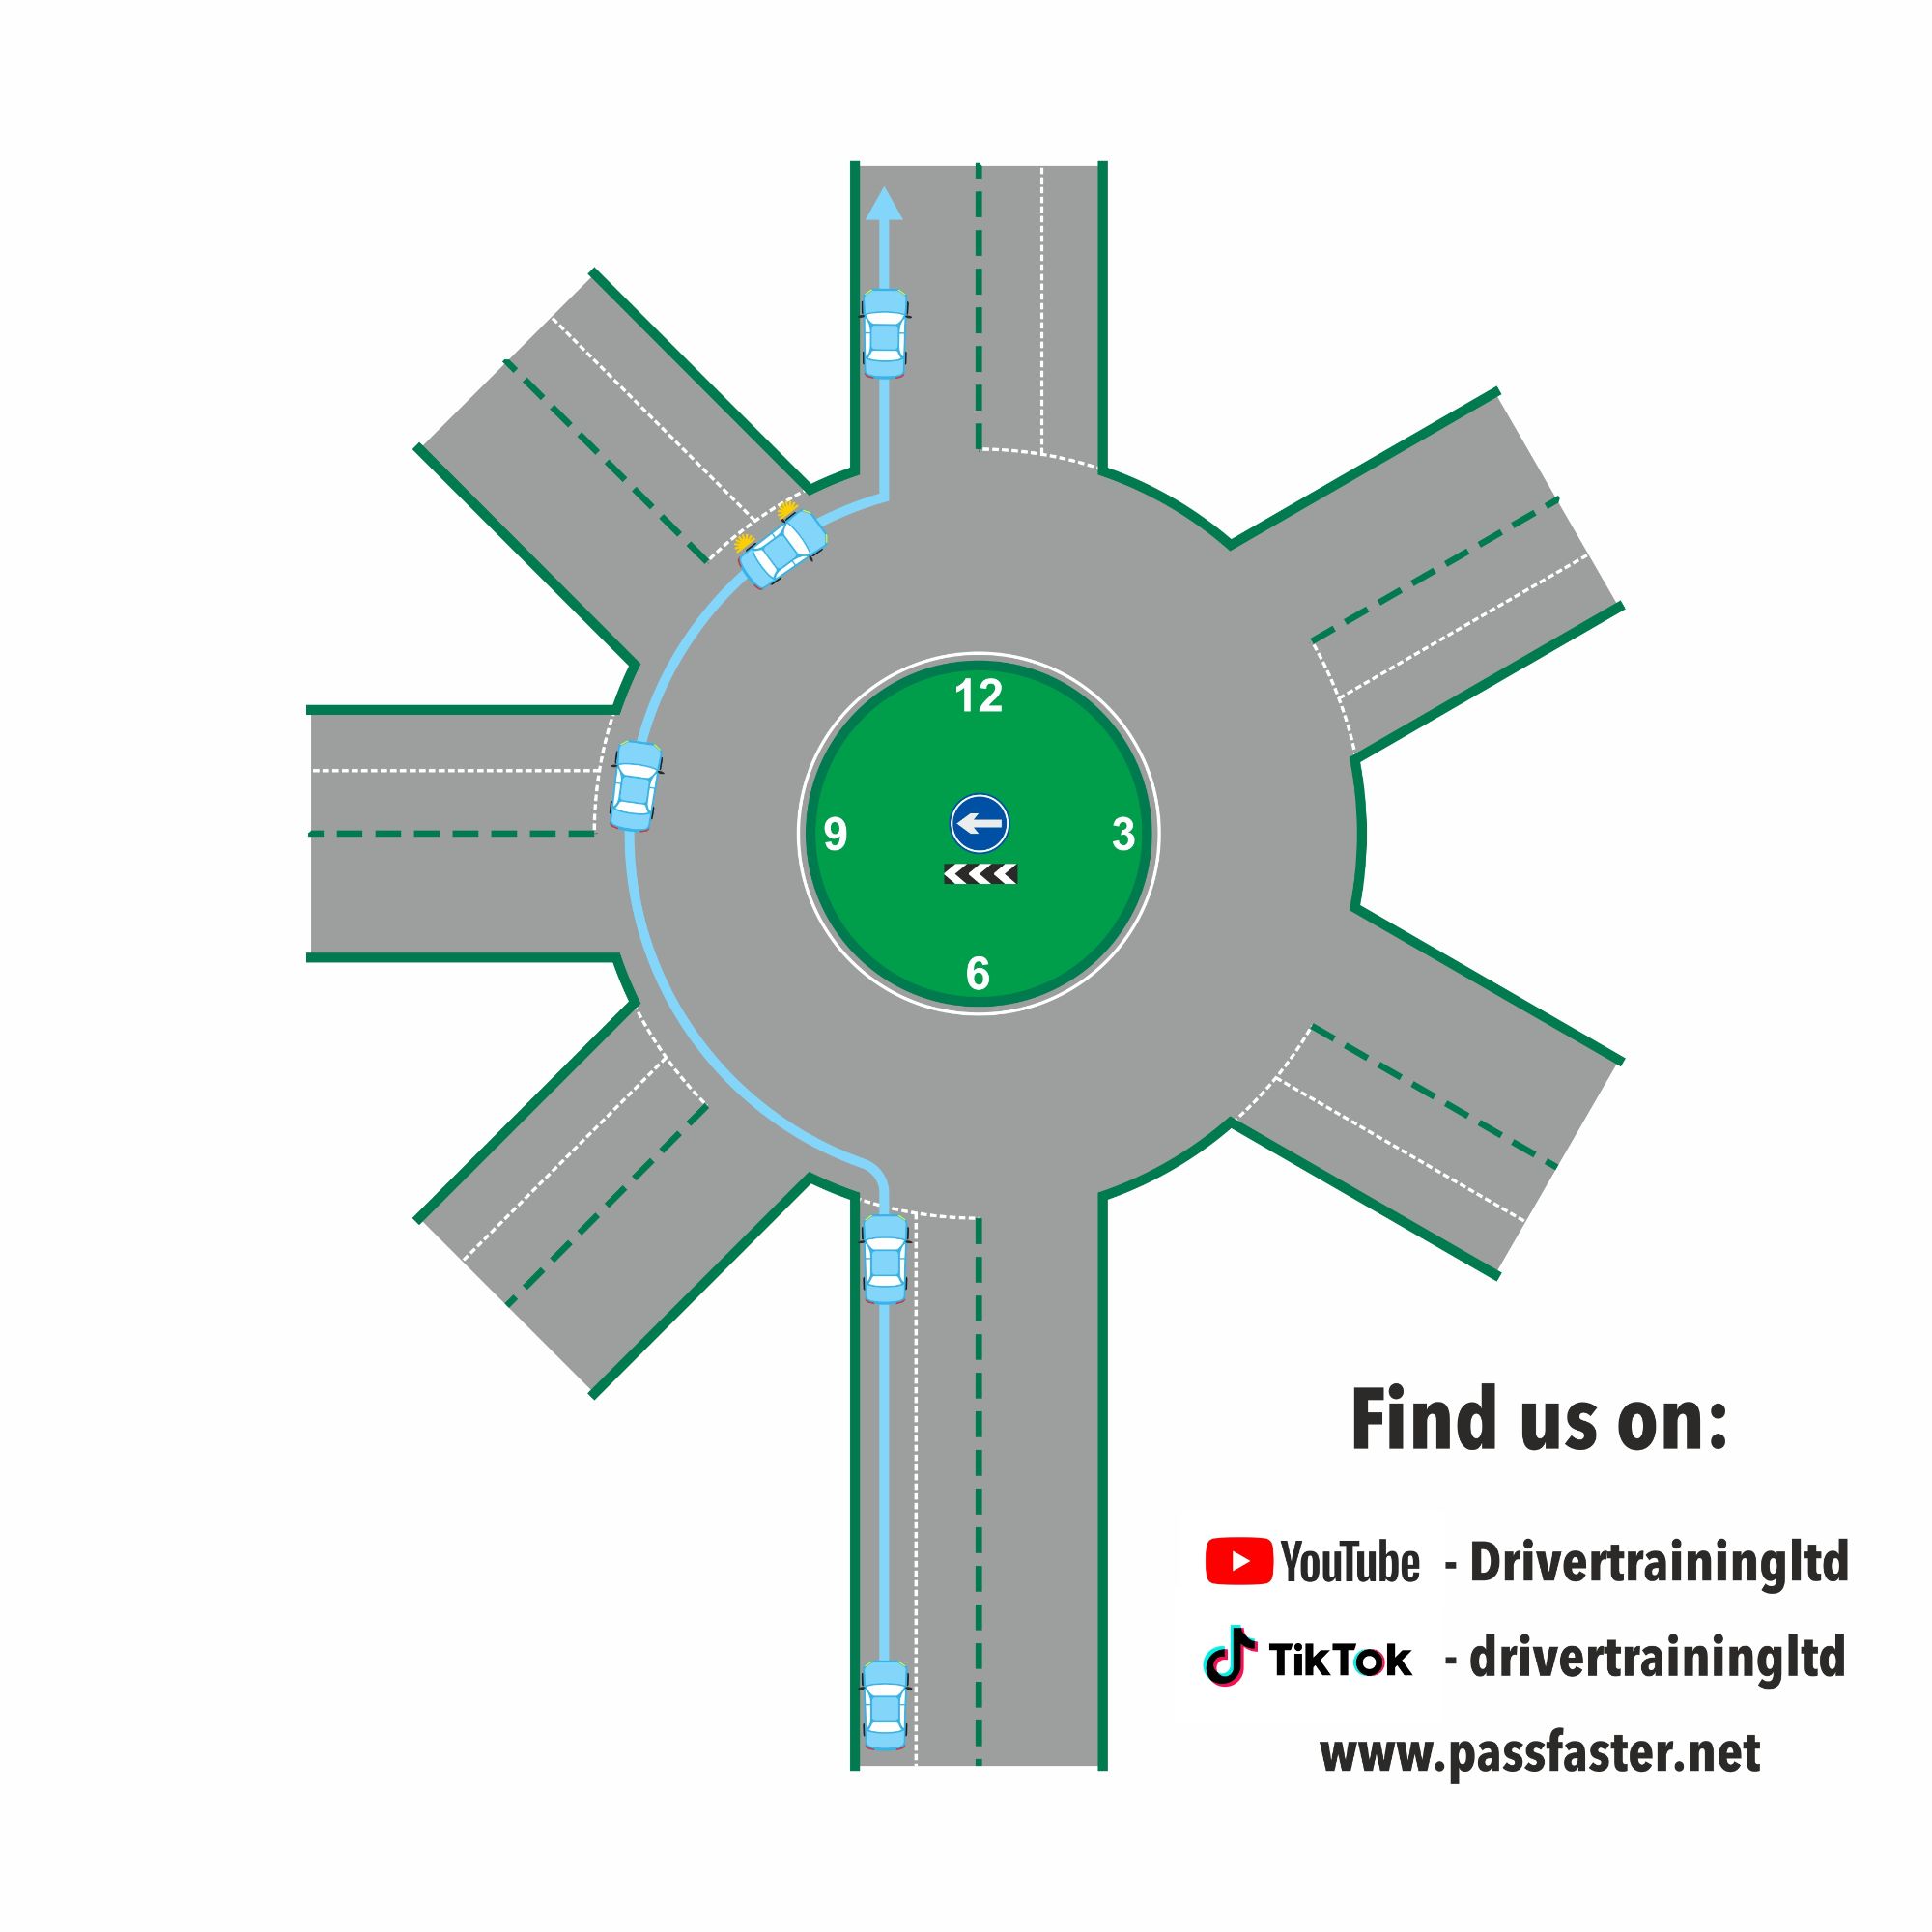 12 Oâ€™clock rule for roundabouts  The easiest way to remember which lane you need to be in on a roundabout, is to think of the roundabout. As a clock. We split the roundabout down the middle.  If the exit you require is 12 oâ€™clock or before you need the left hand lane.  If the exit that you require is after 12 oâ€™clock, you need the right hand lane.  Unless any road markings or signs say differently.